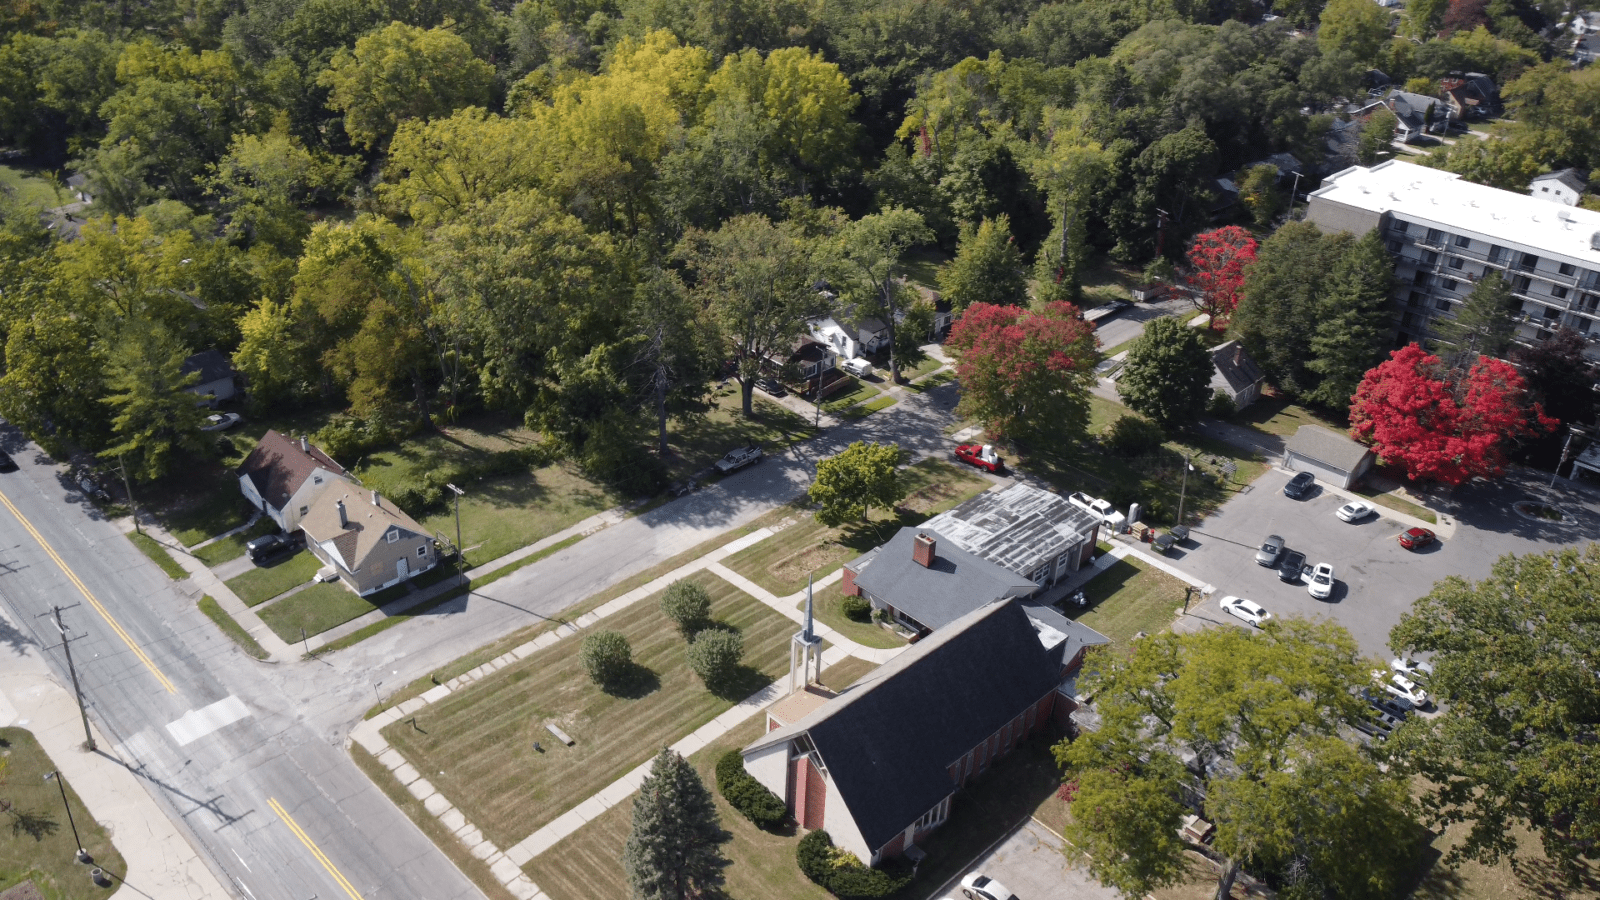 Aerial view of a street corner featuring a church building.